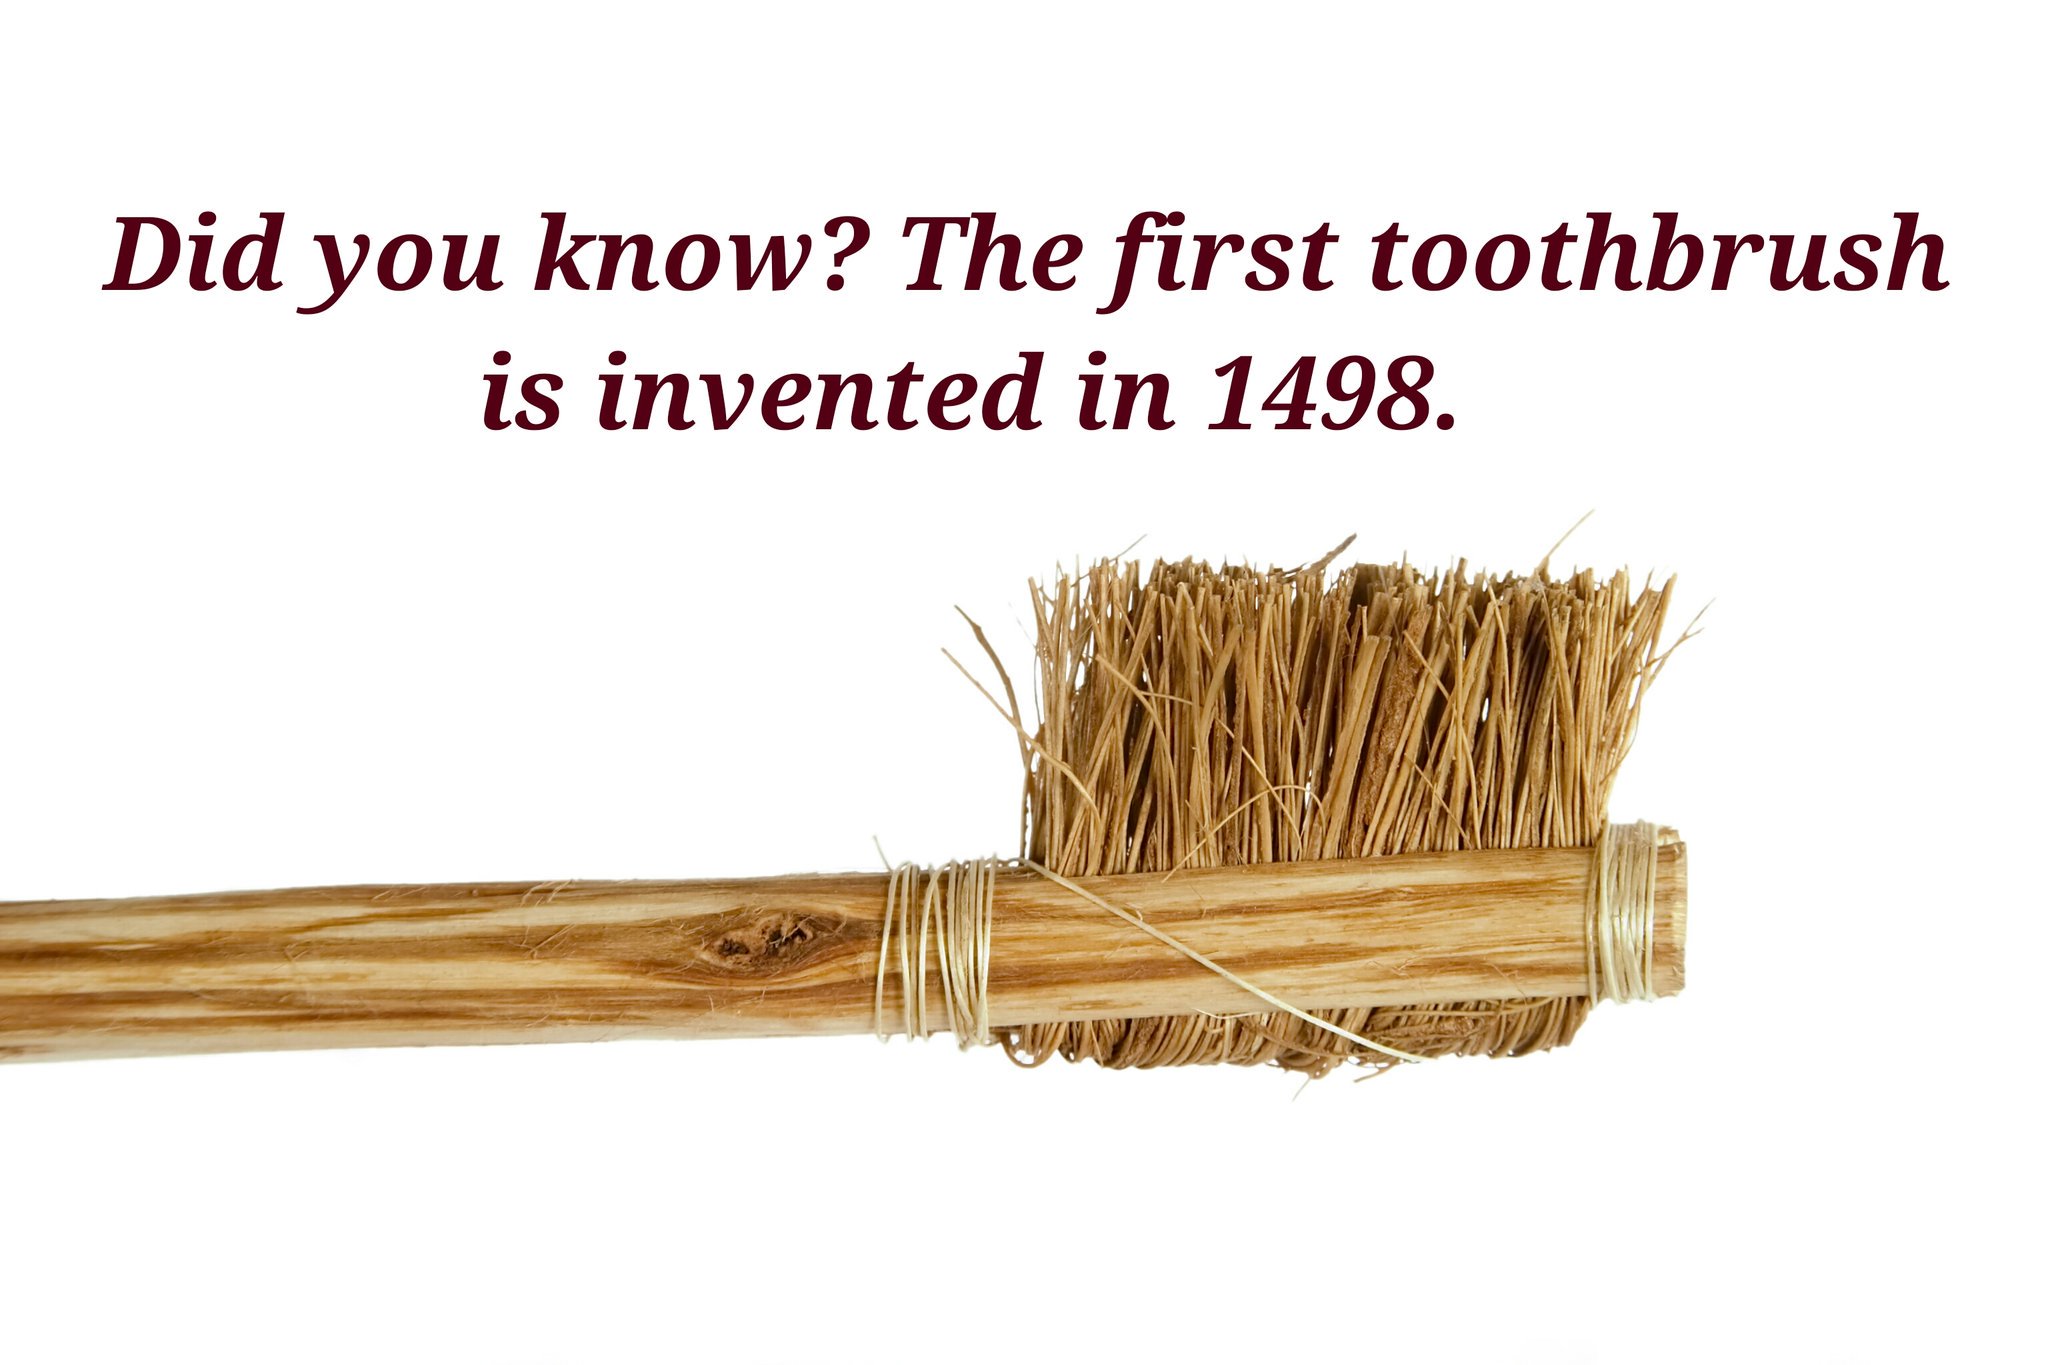 Did You Know the Toothbrush Was Invented 5000 Years Ago?